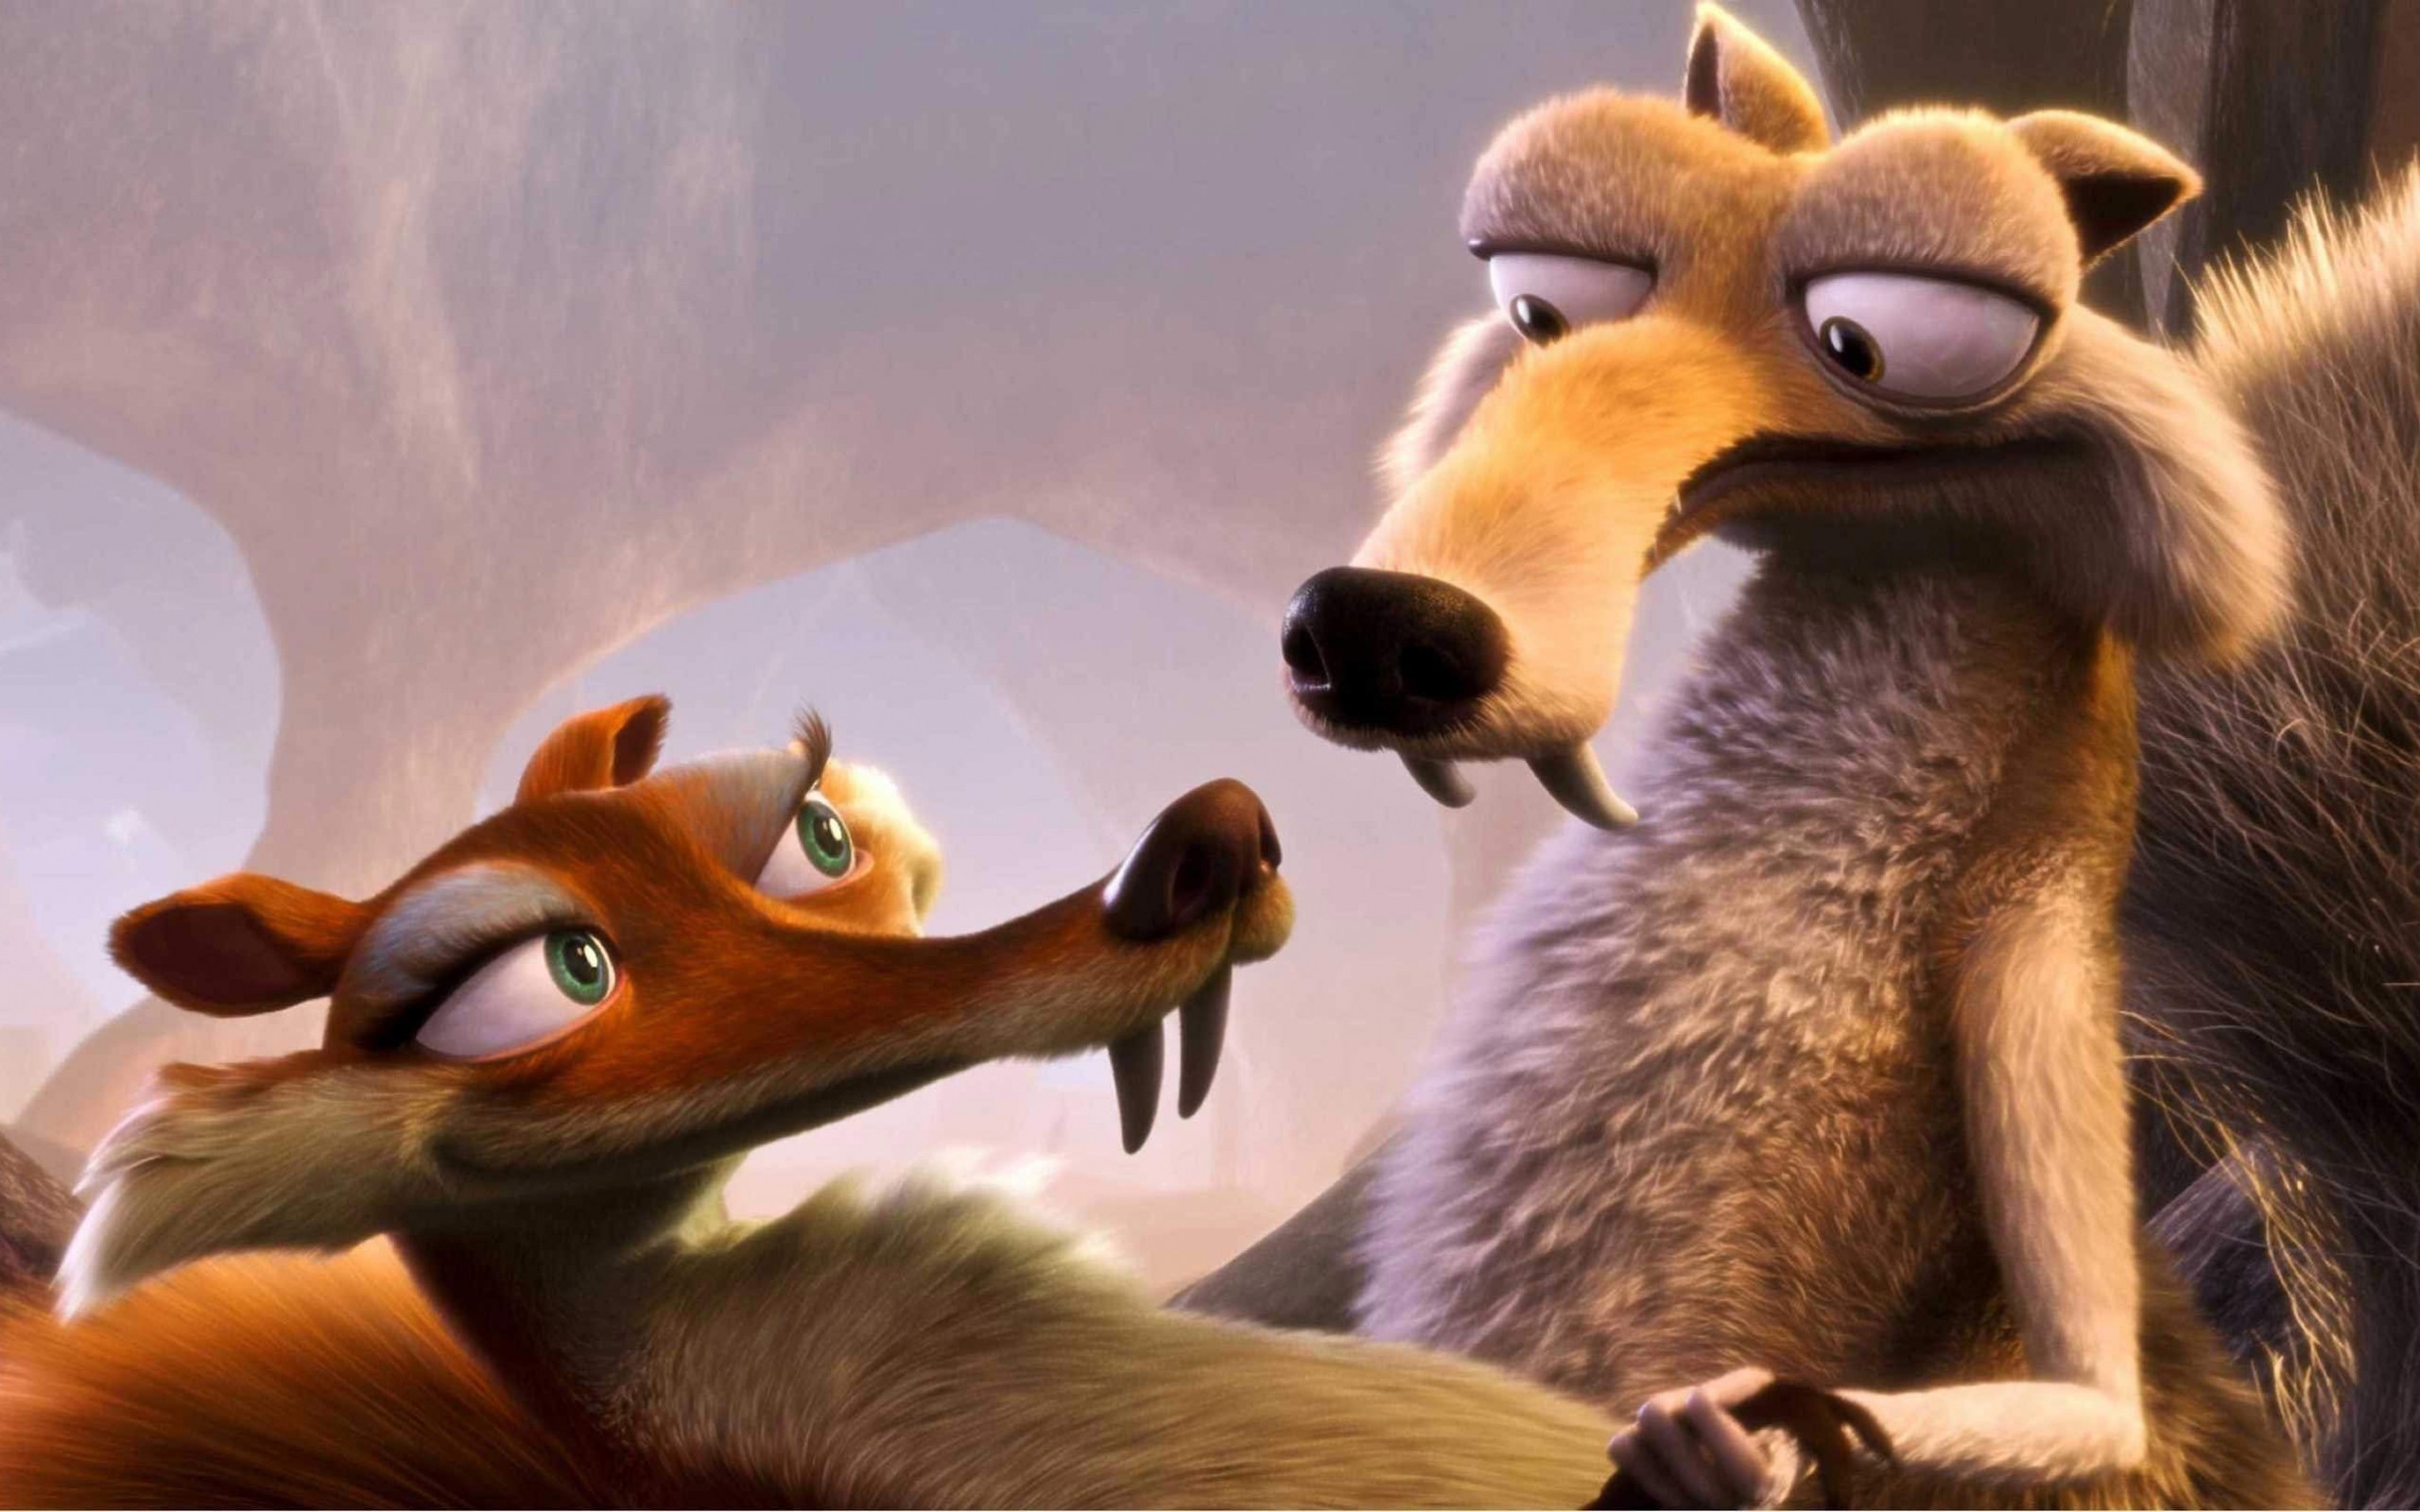 General 2560x1600 Ice Age: Dawn of the Dinosaurs animated movies movies